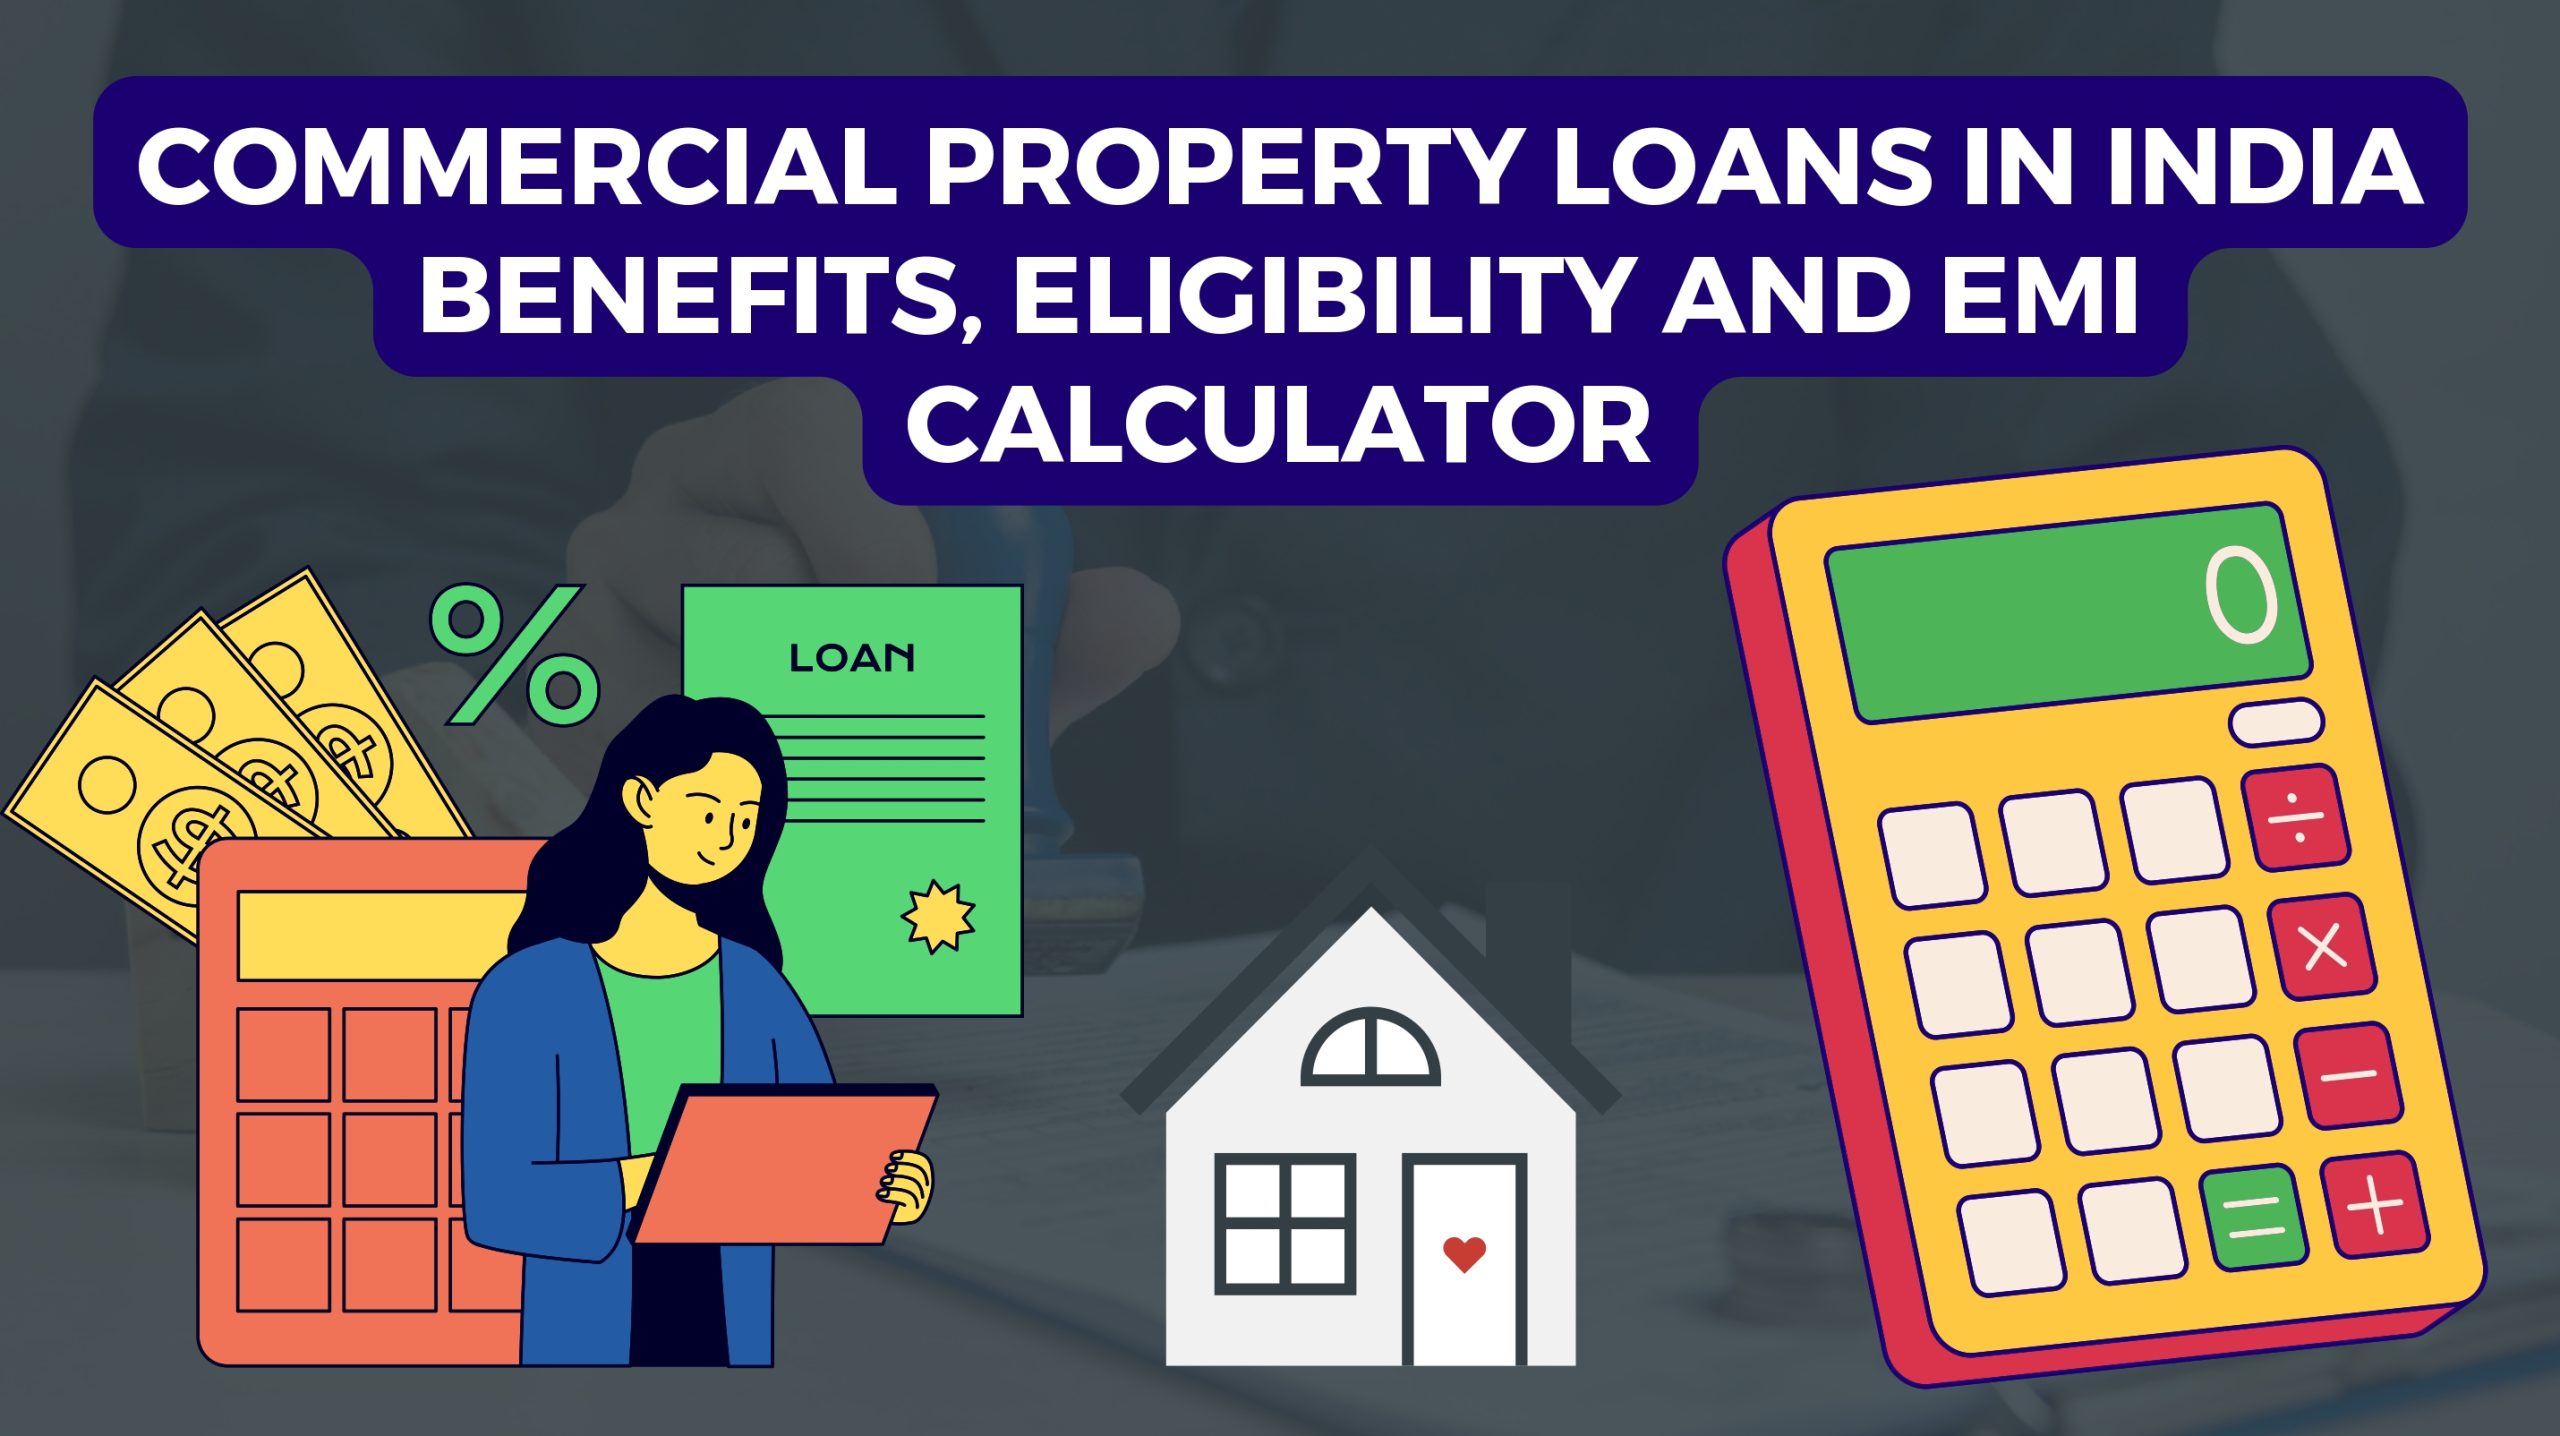 Commercial Property Loans in India: Benefits, Eligibility and EMI Calculator